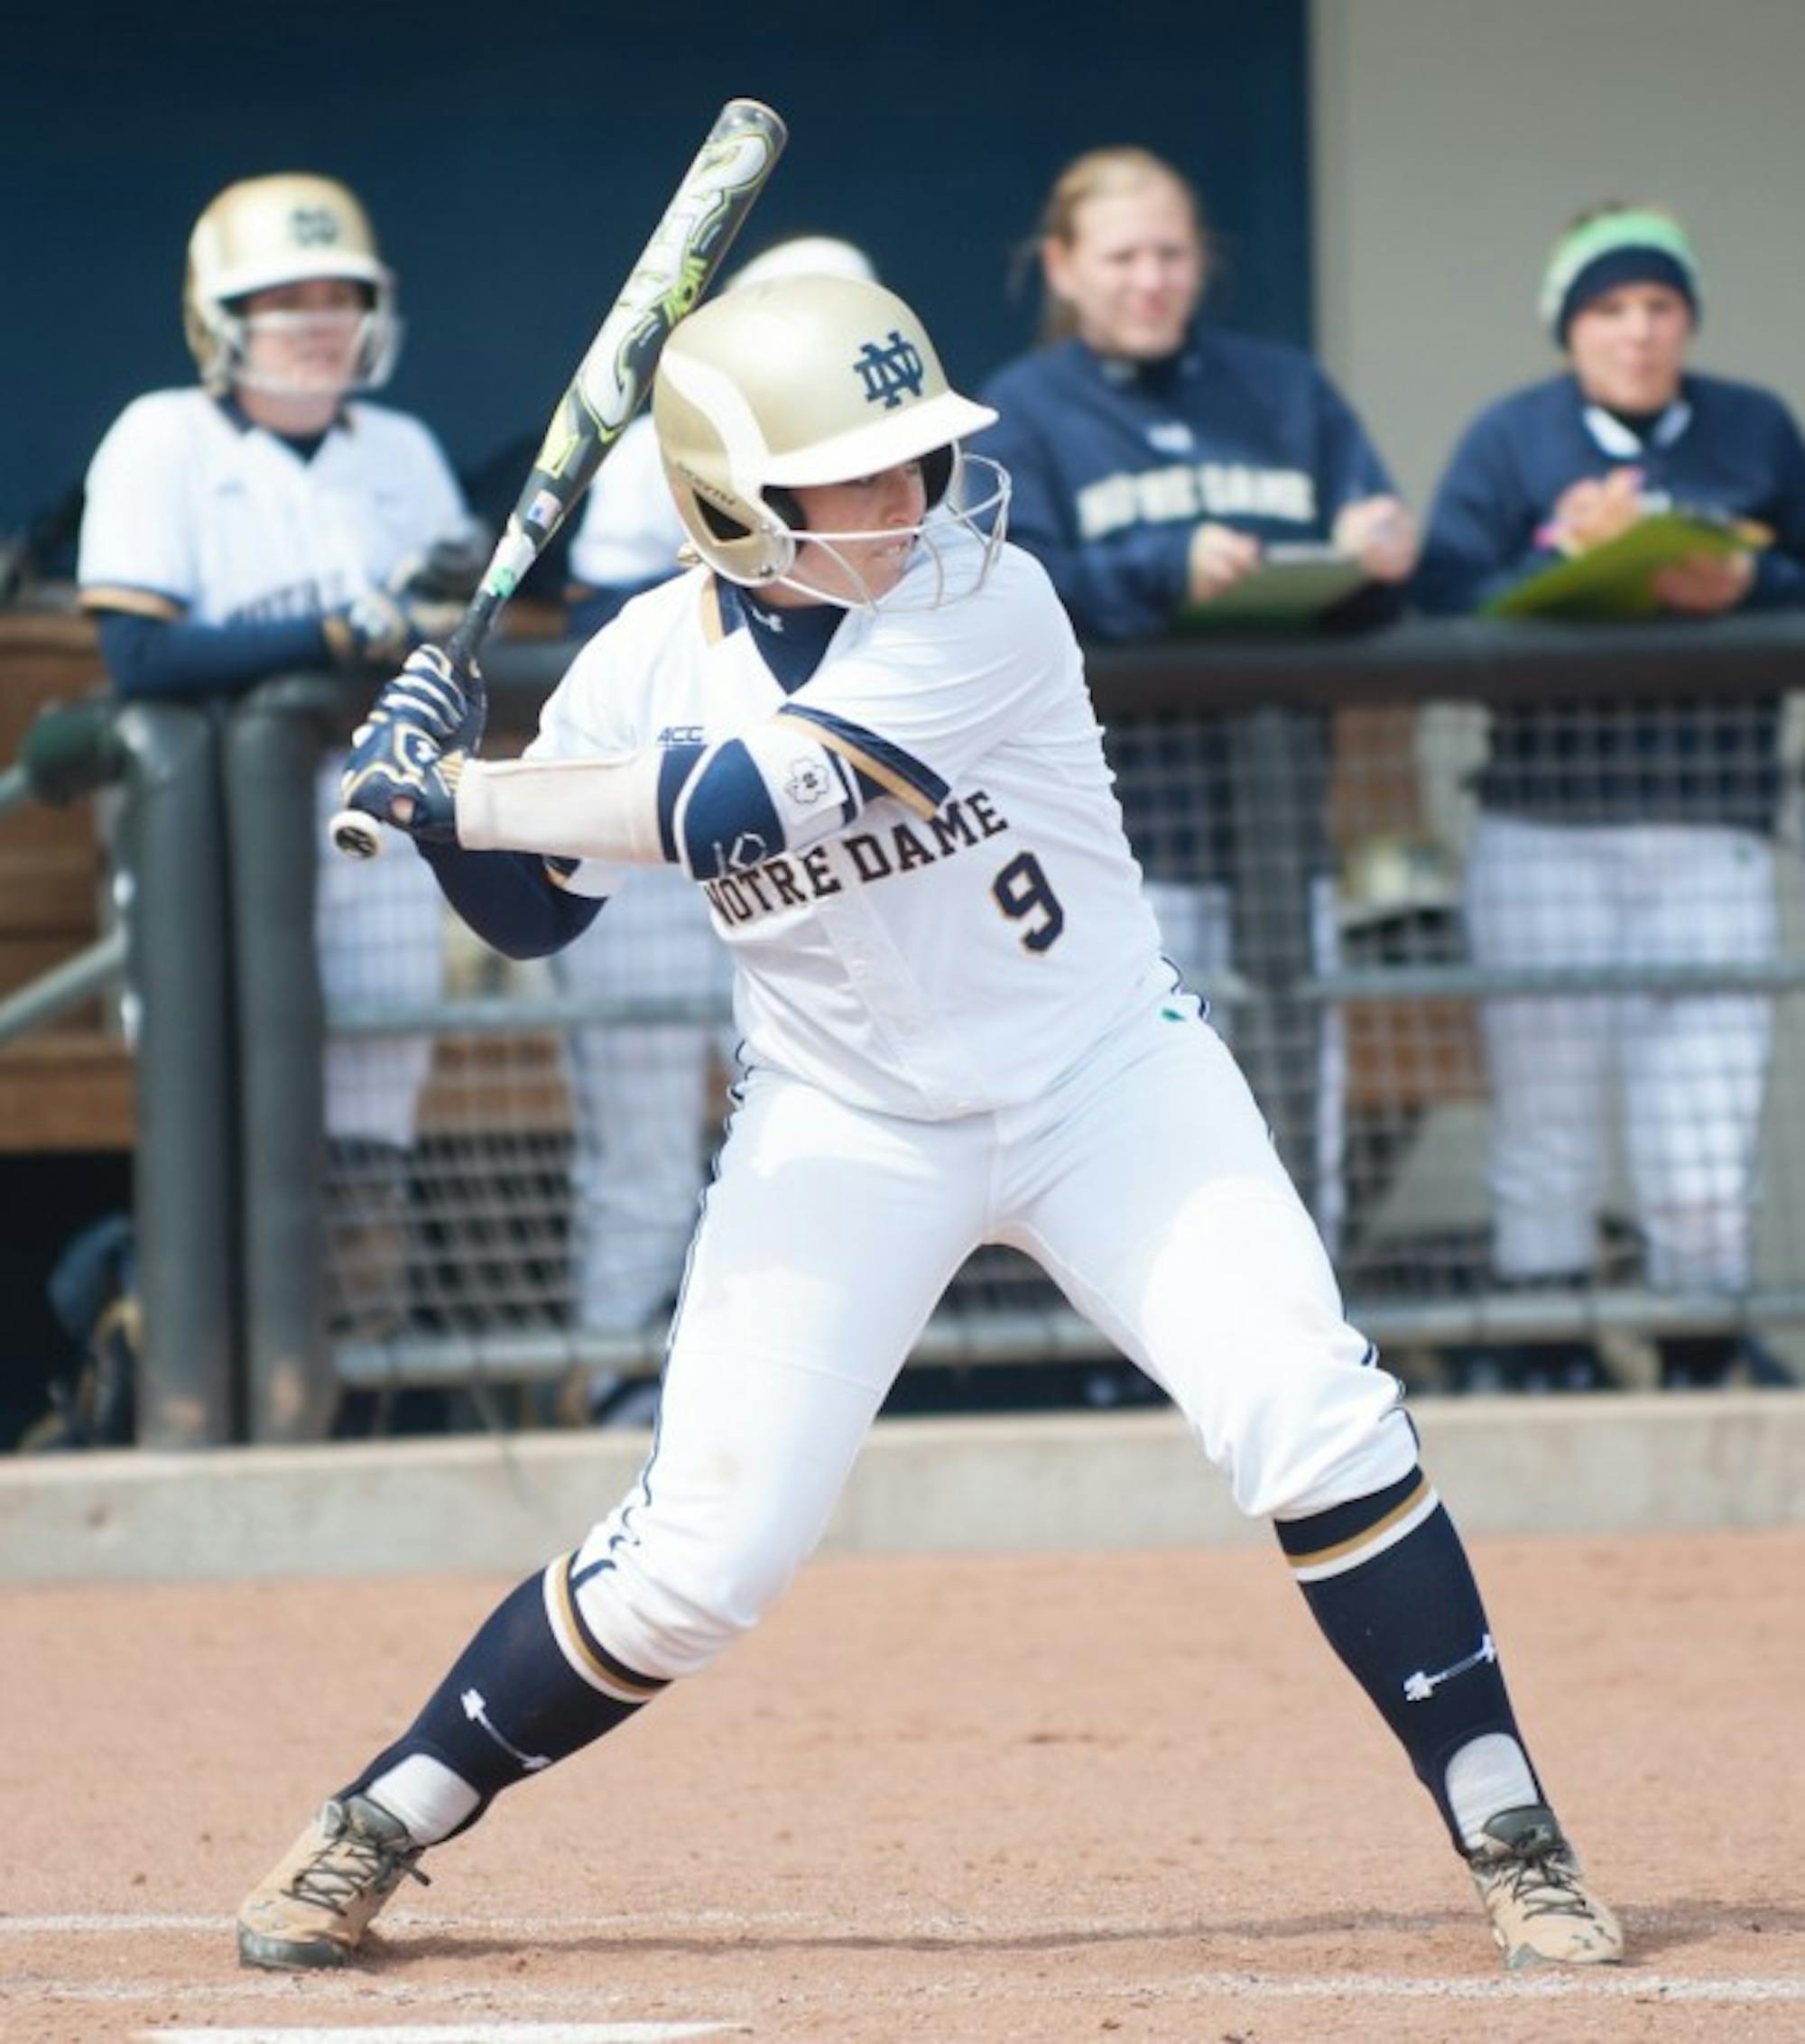 Irish senior third baseman Katey Haus waits for a pitch in Notre Dame’s 6-1 win over Georgia Tech on Saturday at Melissa Cook Stadium. Haus had one RBI in the victory.